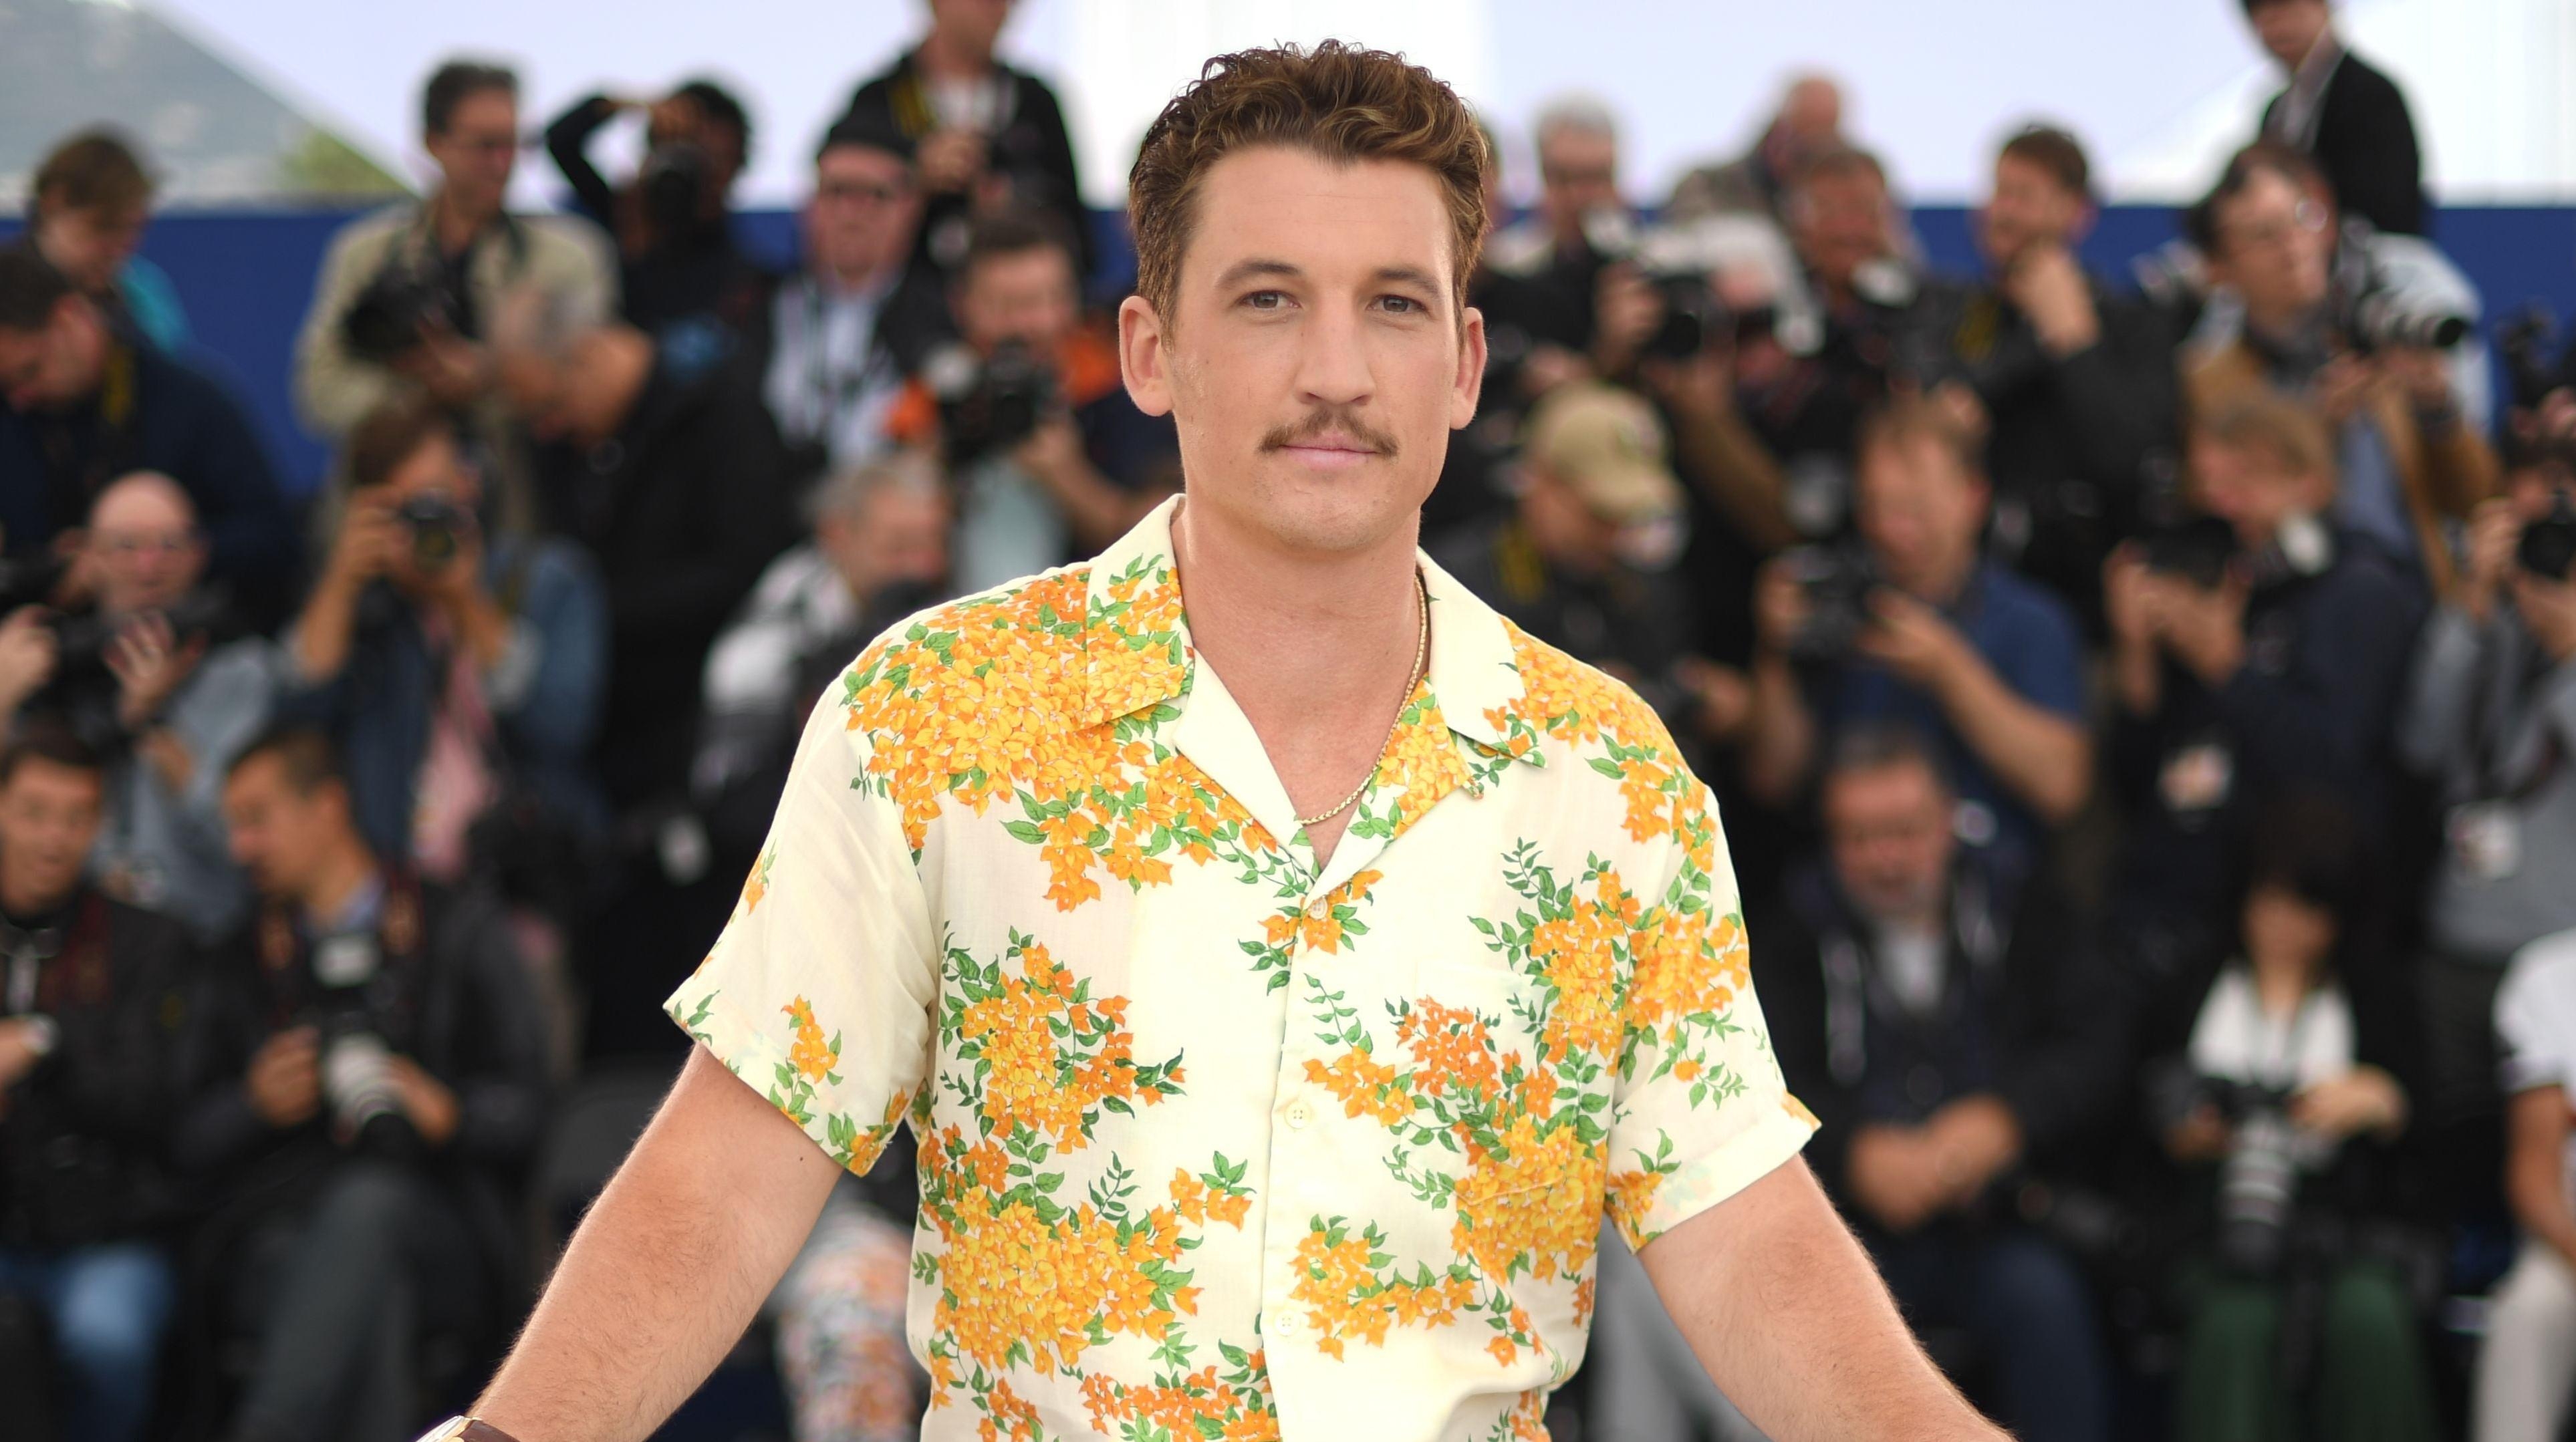 Miles Teller replaces Armie Hammer on The Godfather making-of series, The Offer